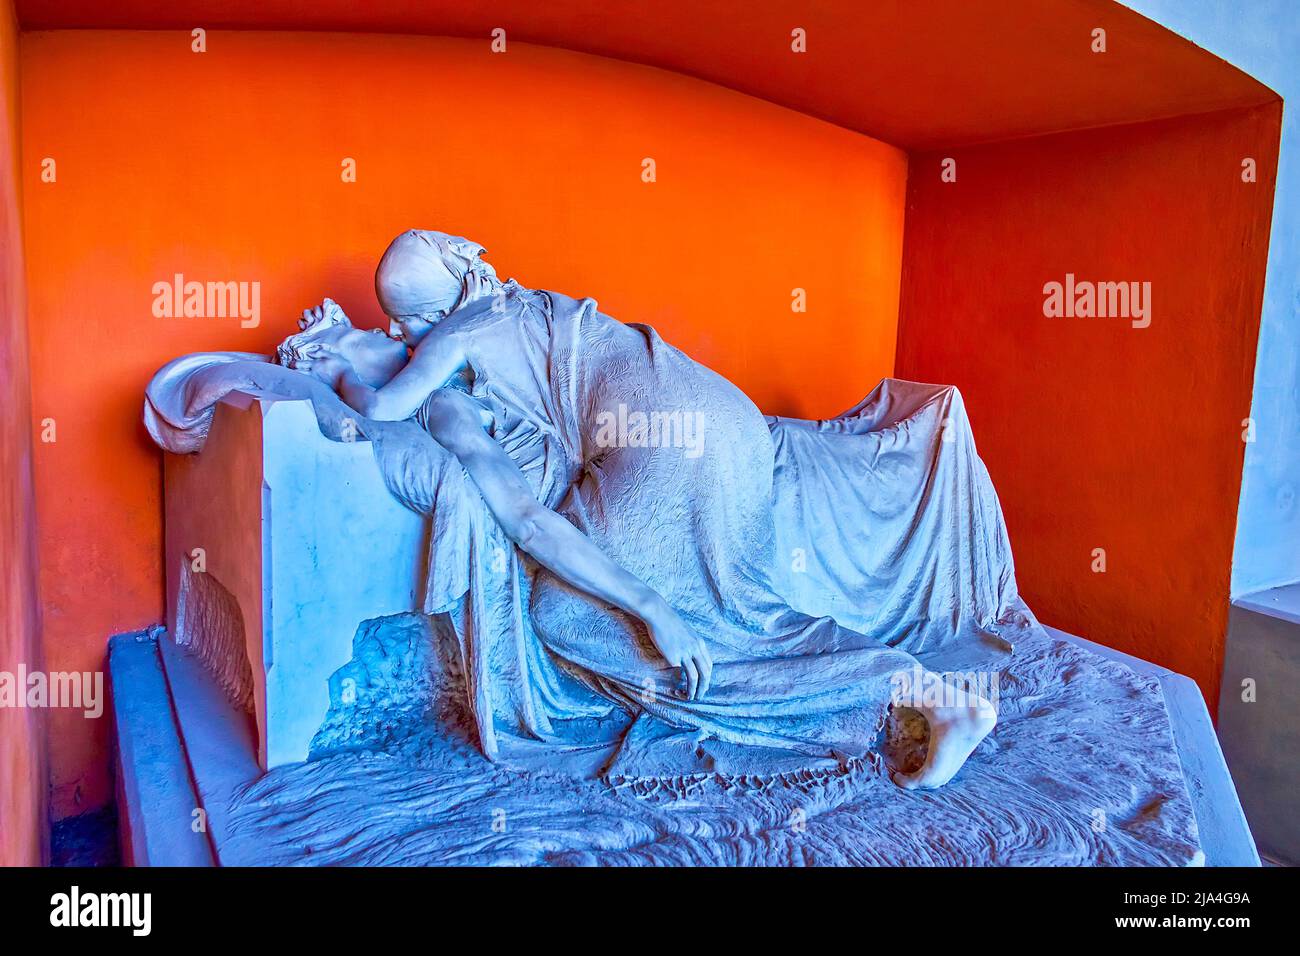 MILAN, ITALY - APRIL 5, 2022: Imressive tombstone with a sculpture of a couple in Famedio of Memorial Cemetery, on April 5 in Milan, Italy Stock Photo